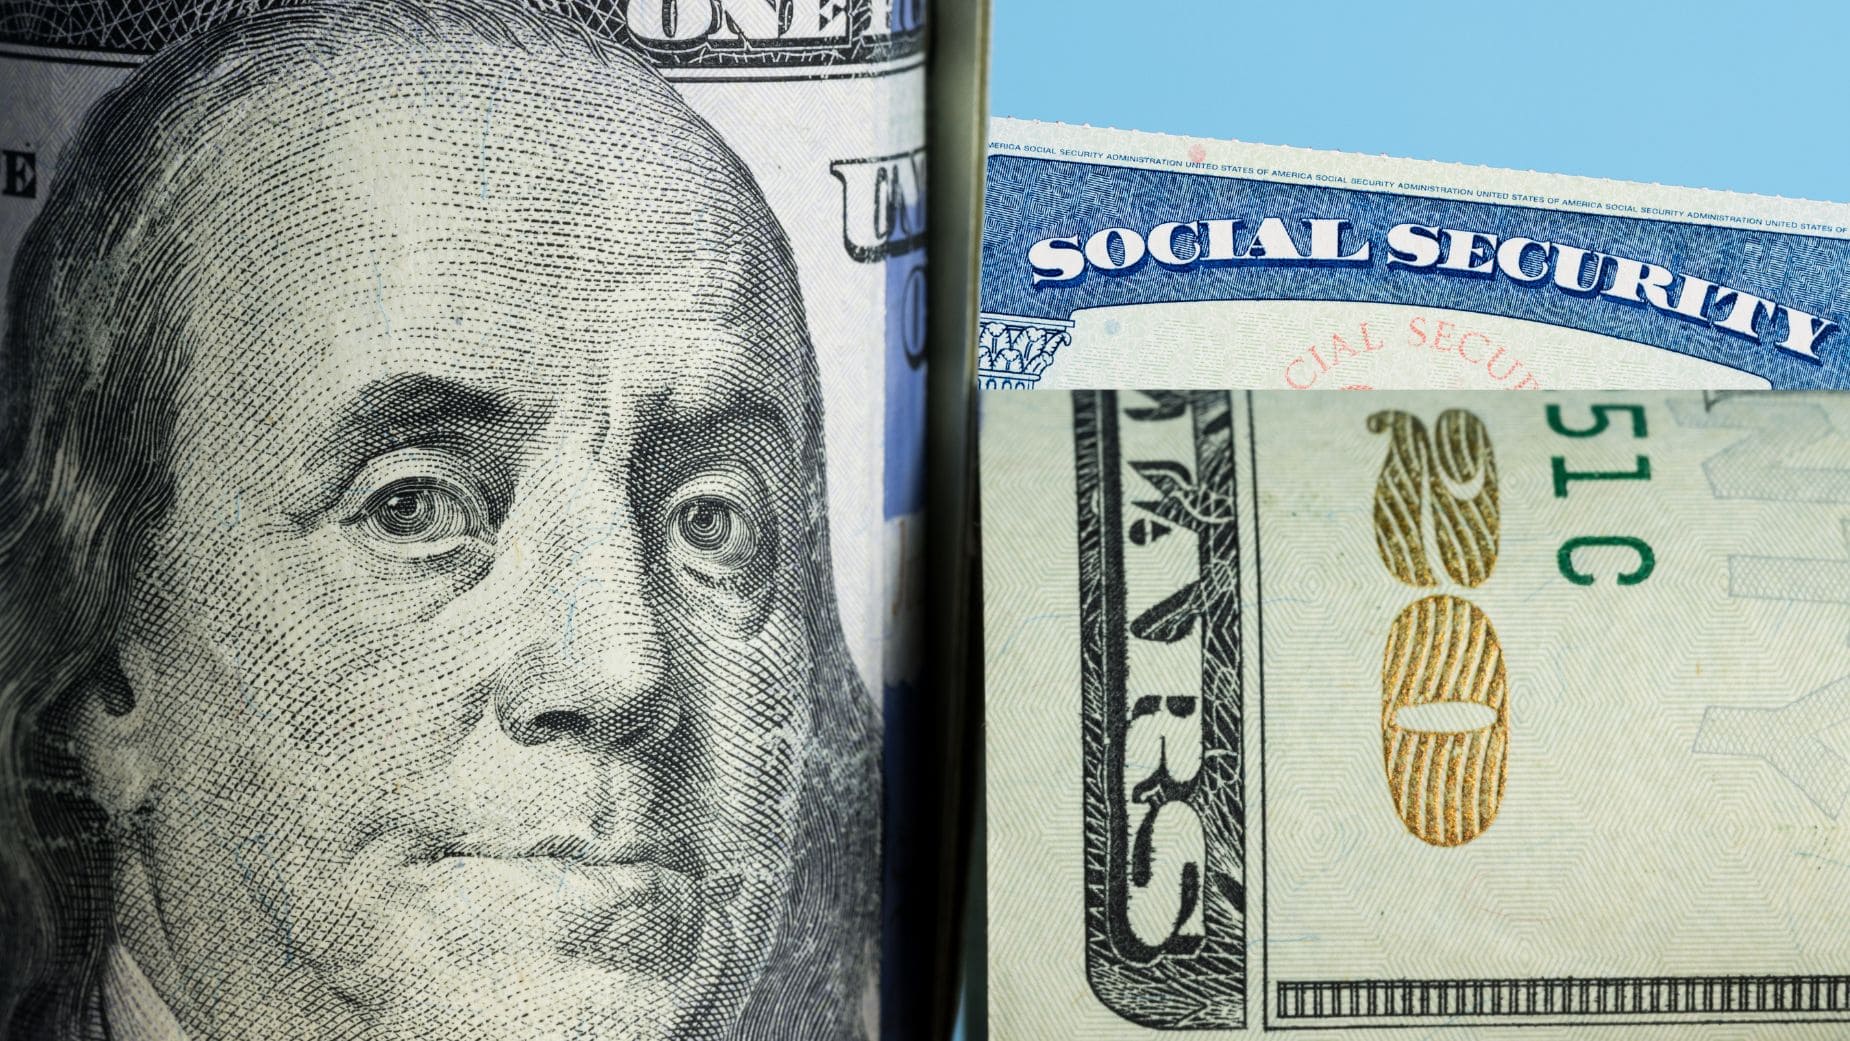 The new Social Security benefit will be around 1,000 dollars